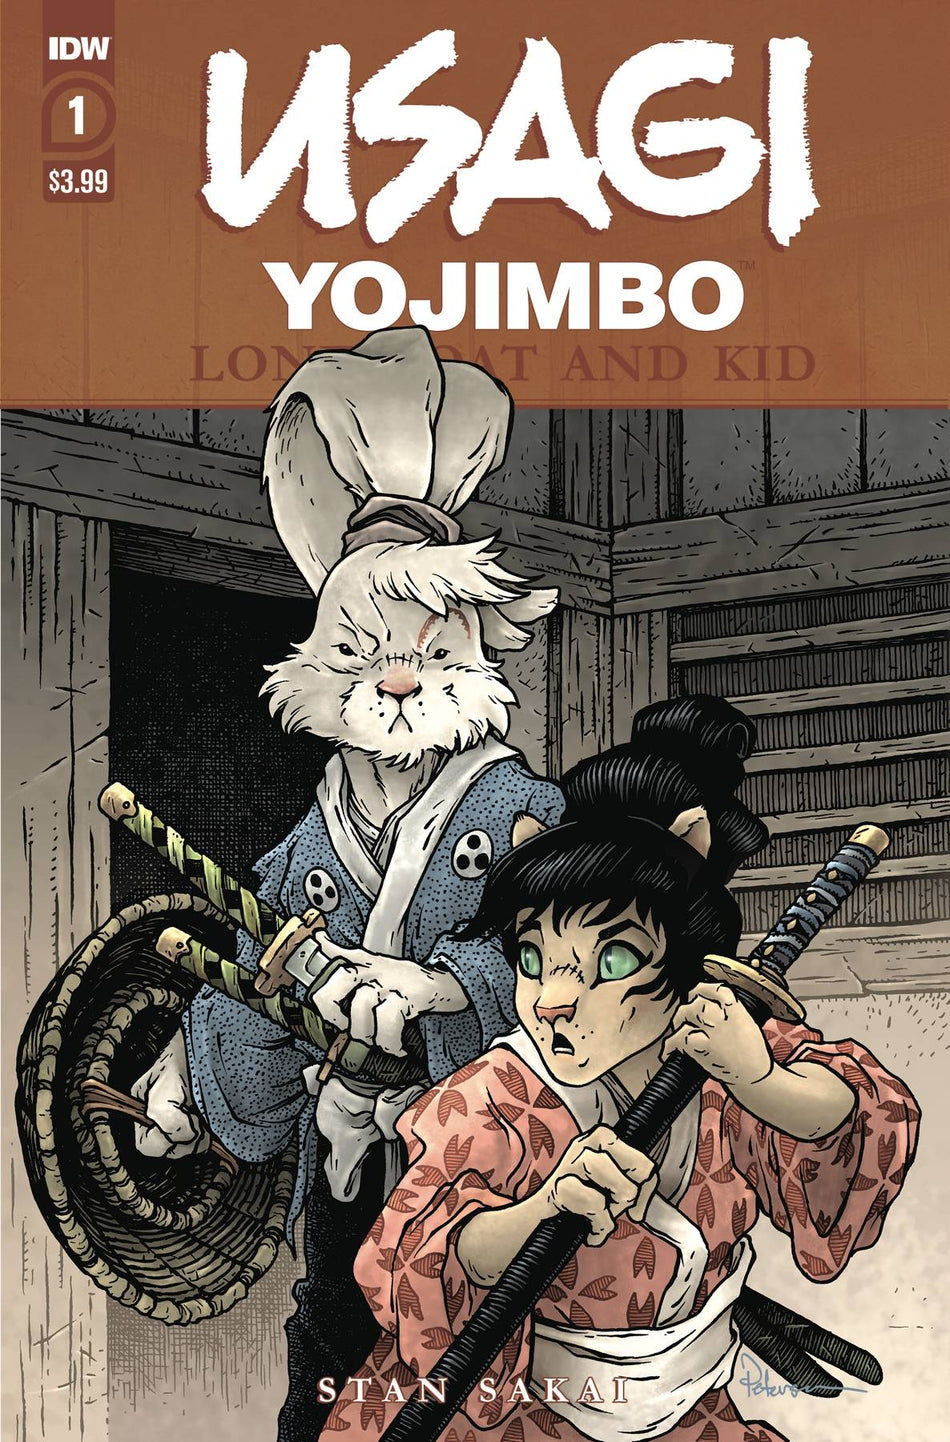 Photo of Usagi Yojimbo Lone Goat & Kid Issue 1 comic sold by Stronghold Collectibles